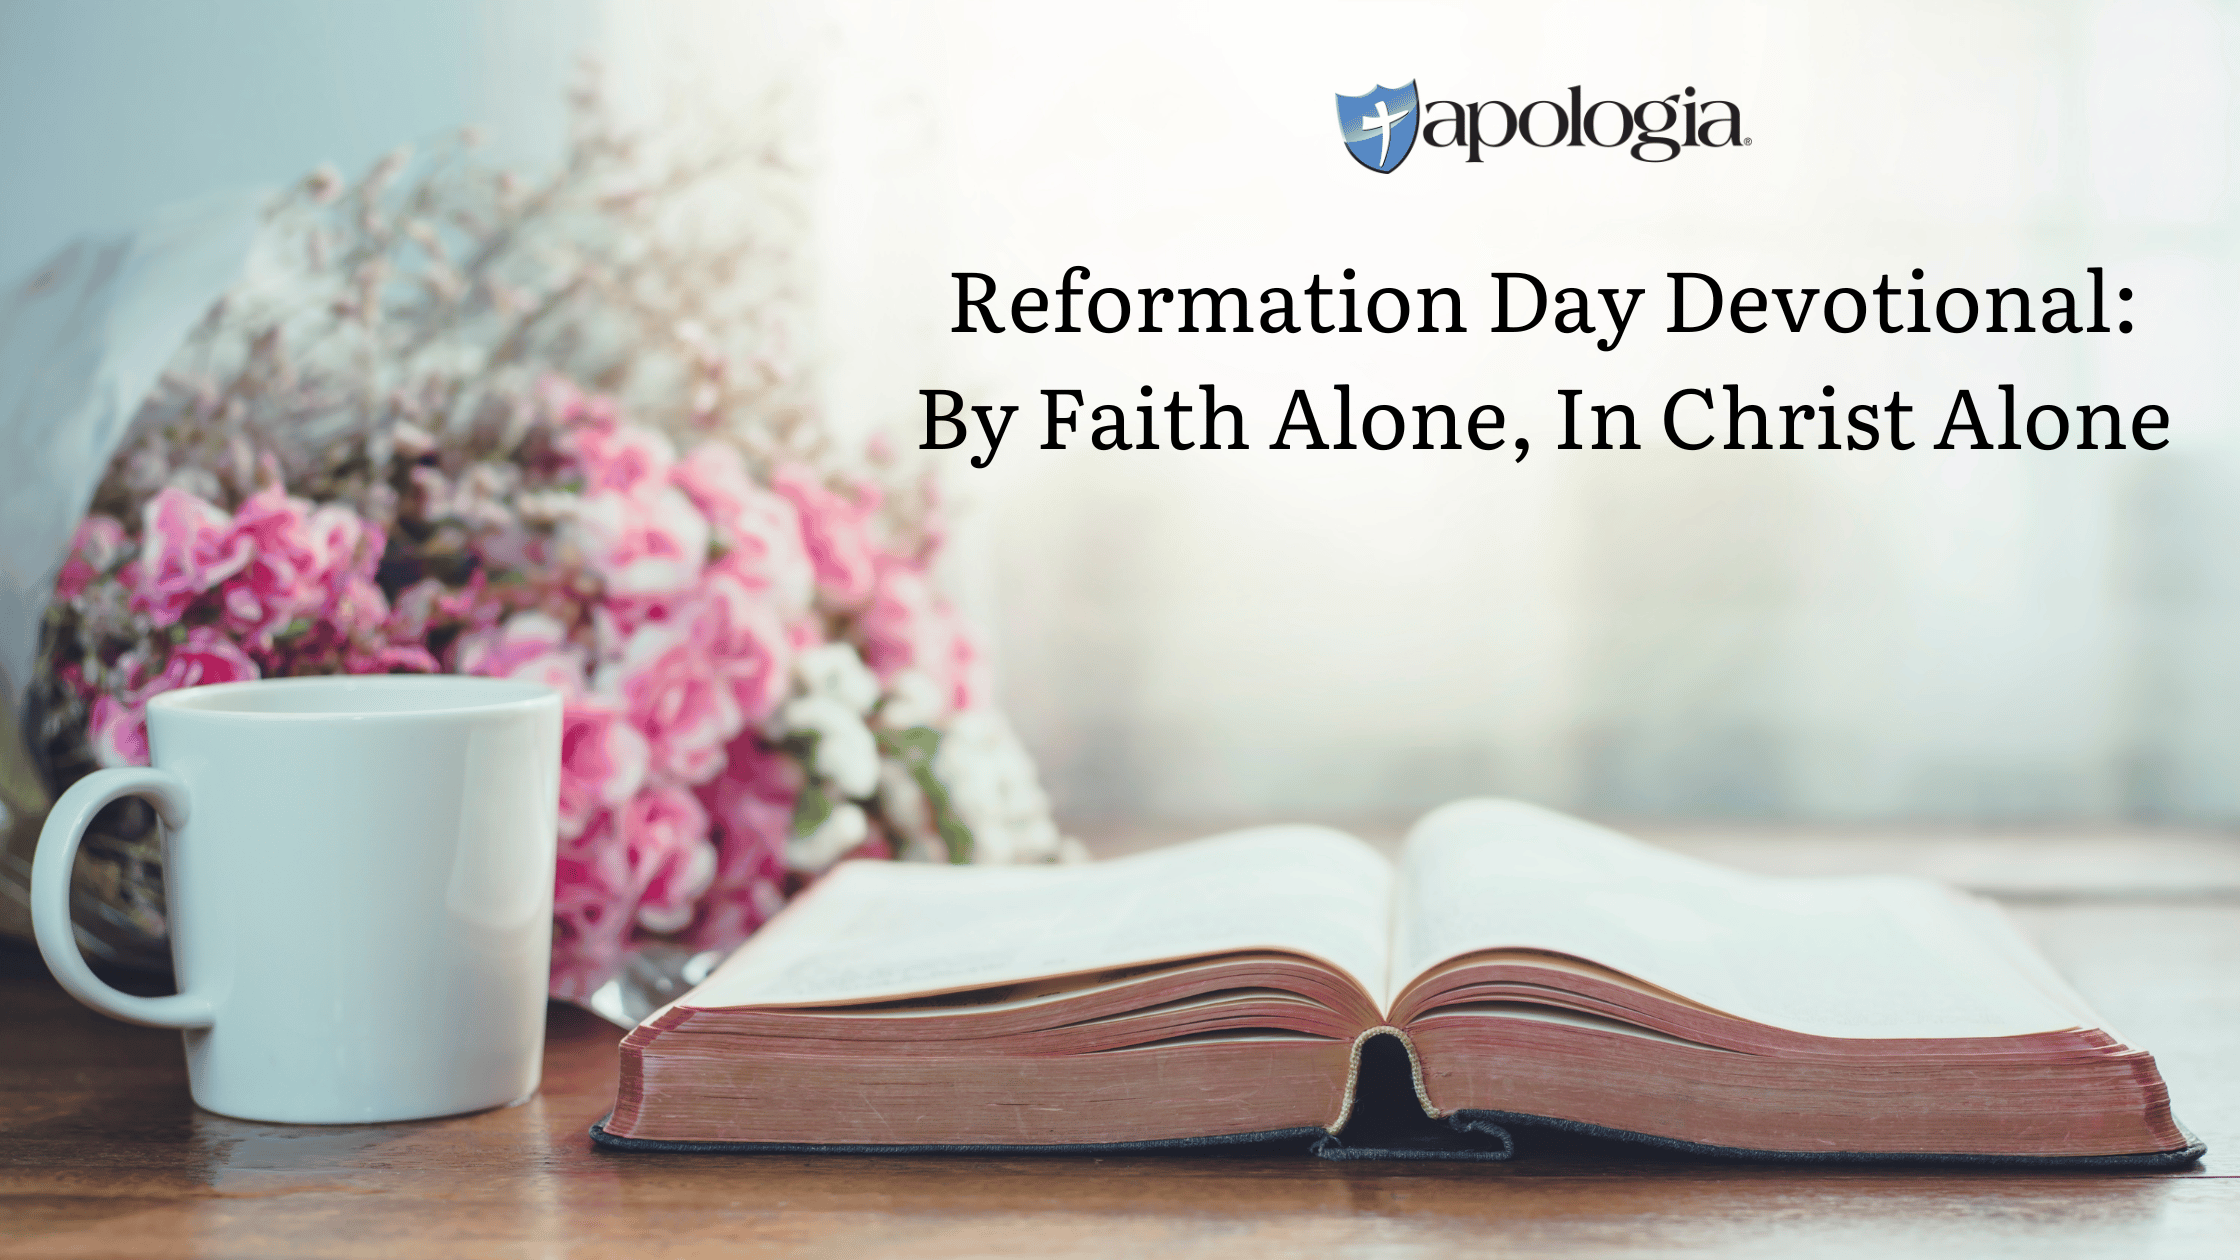 Reformation Day Devotional: By Faith Alone, In Christ Alone